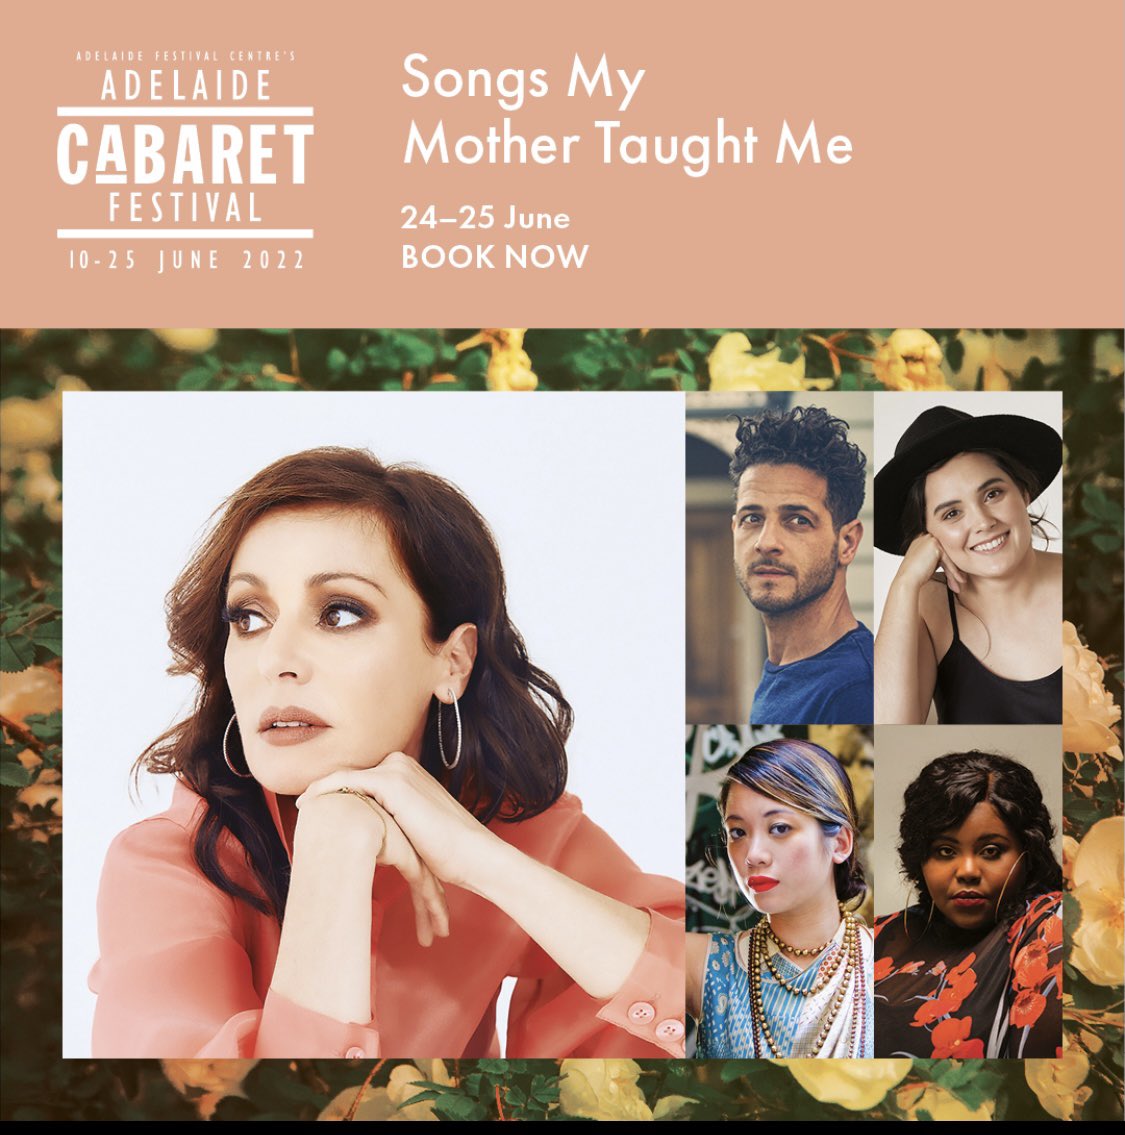 Can’t wait for you to experience Songs My Mother Taught Me at the Adelaide Cabaret Festival. First release tickets on sale now adelaidecabaretfestival.com.au or premier.ticketek.com.au